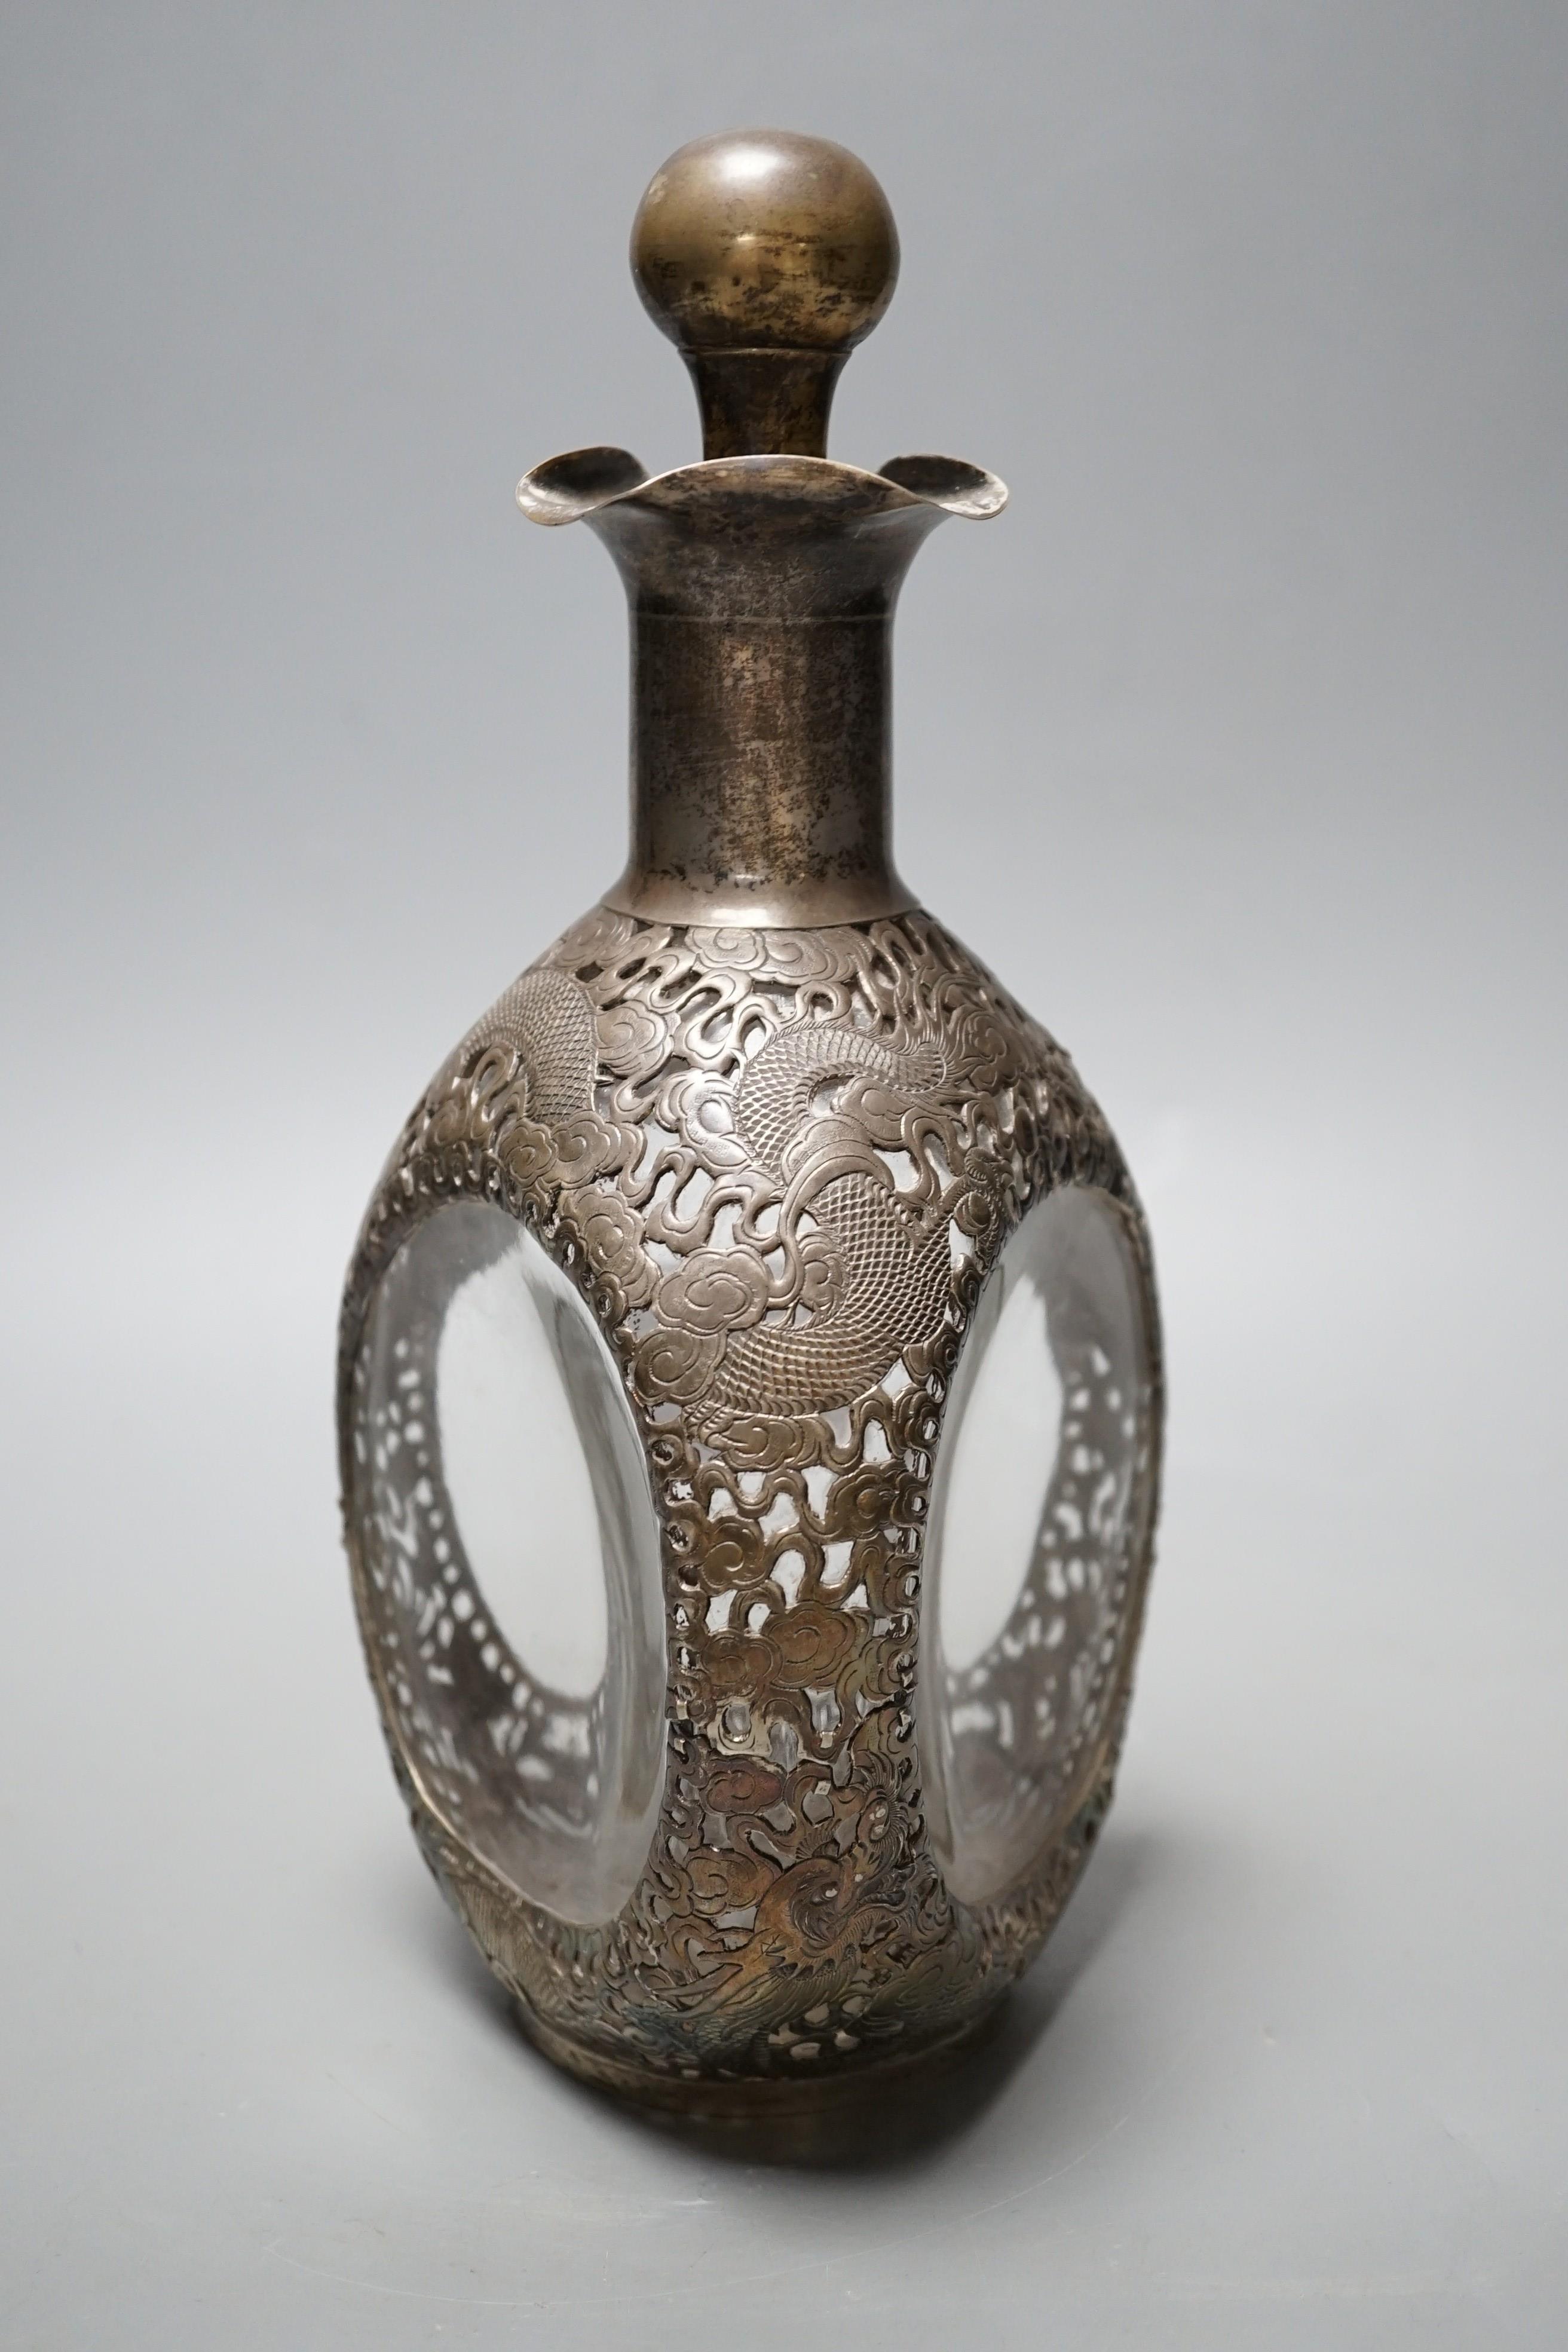 A Chinese white metal mounted glass 'dimple' decanter and stopper, by Wang Hing, Hong Kong, 26.5cm.